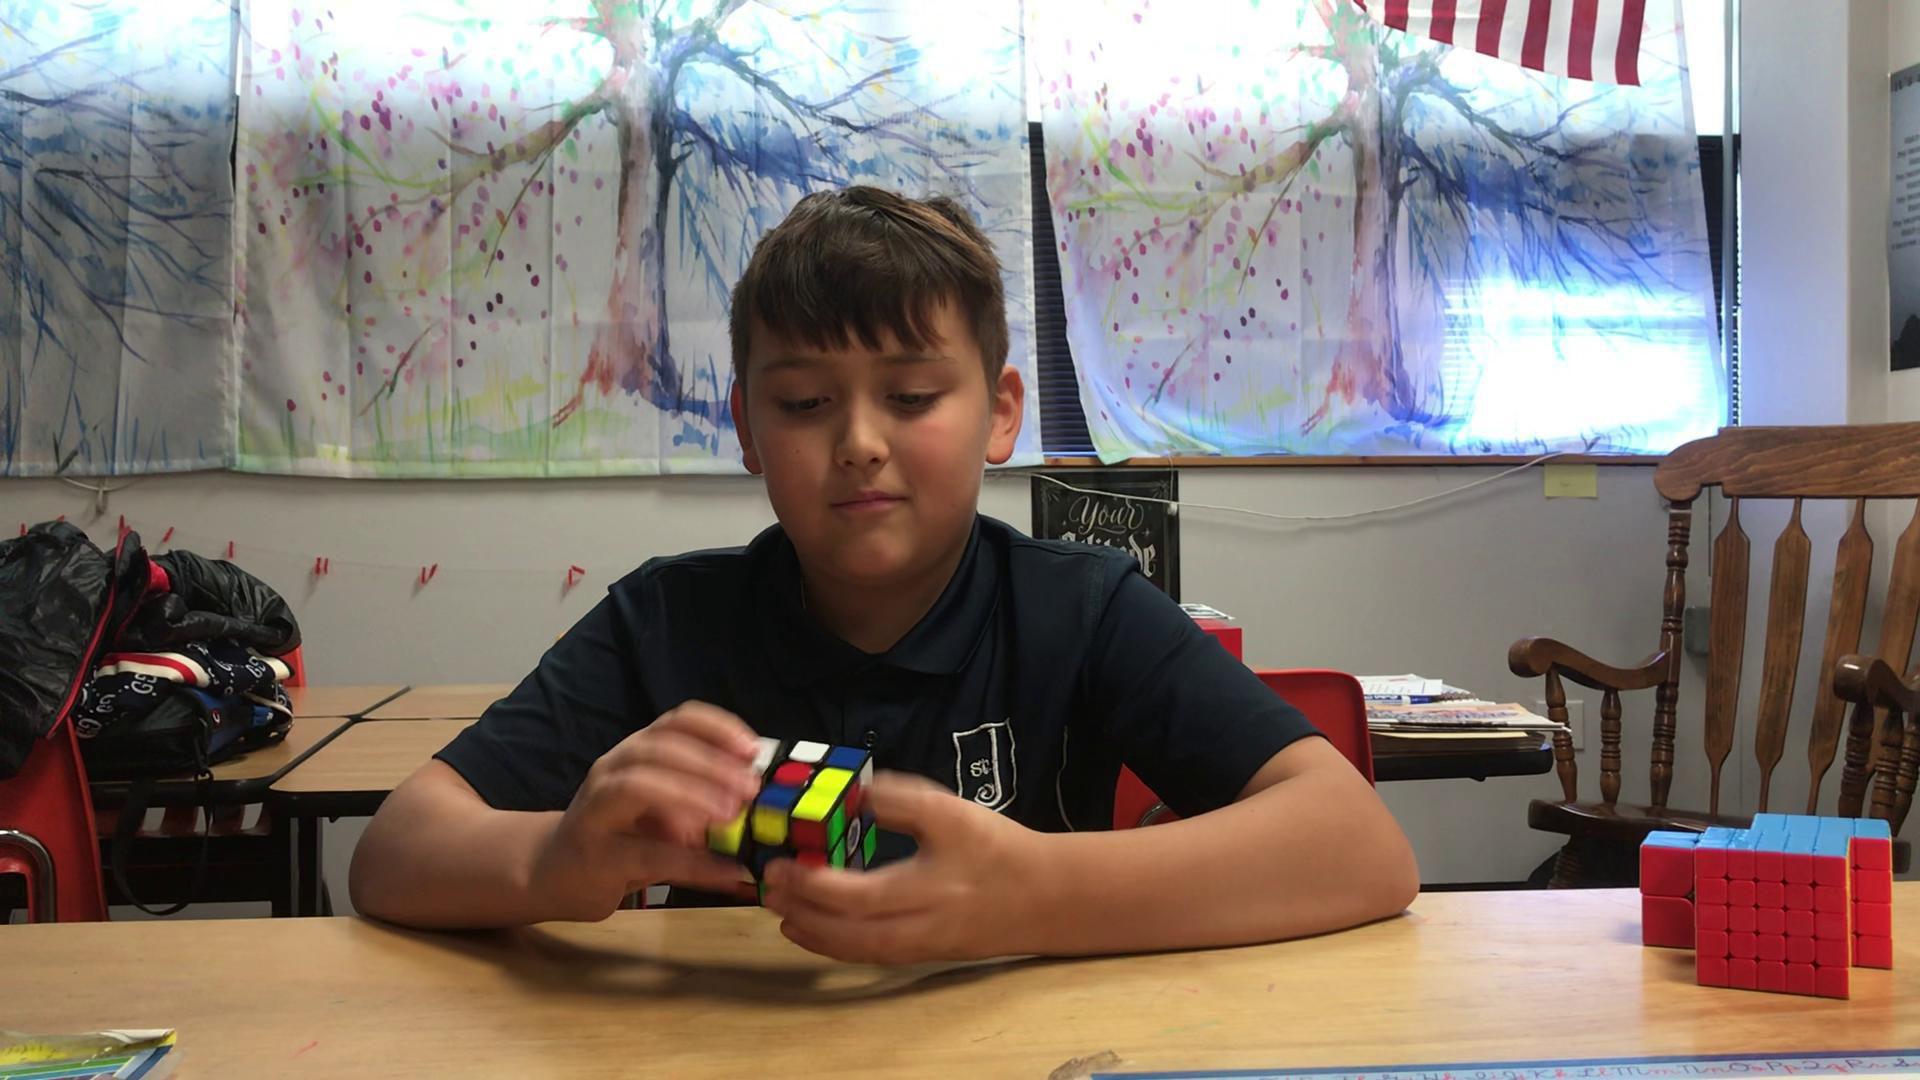 Remember Rubik S Cube This 11 Year Old Solves In Seconds Local